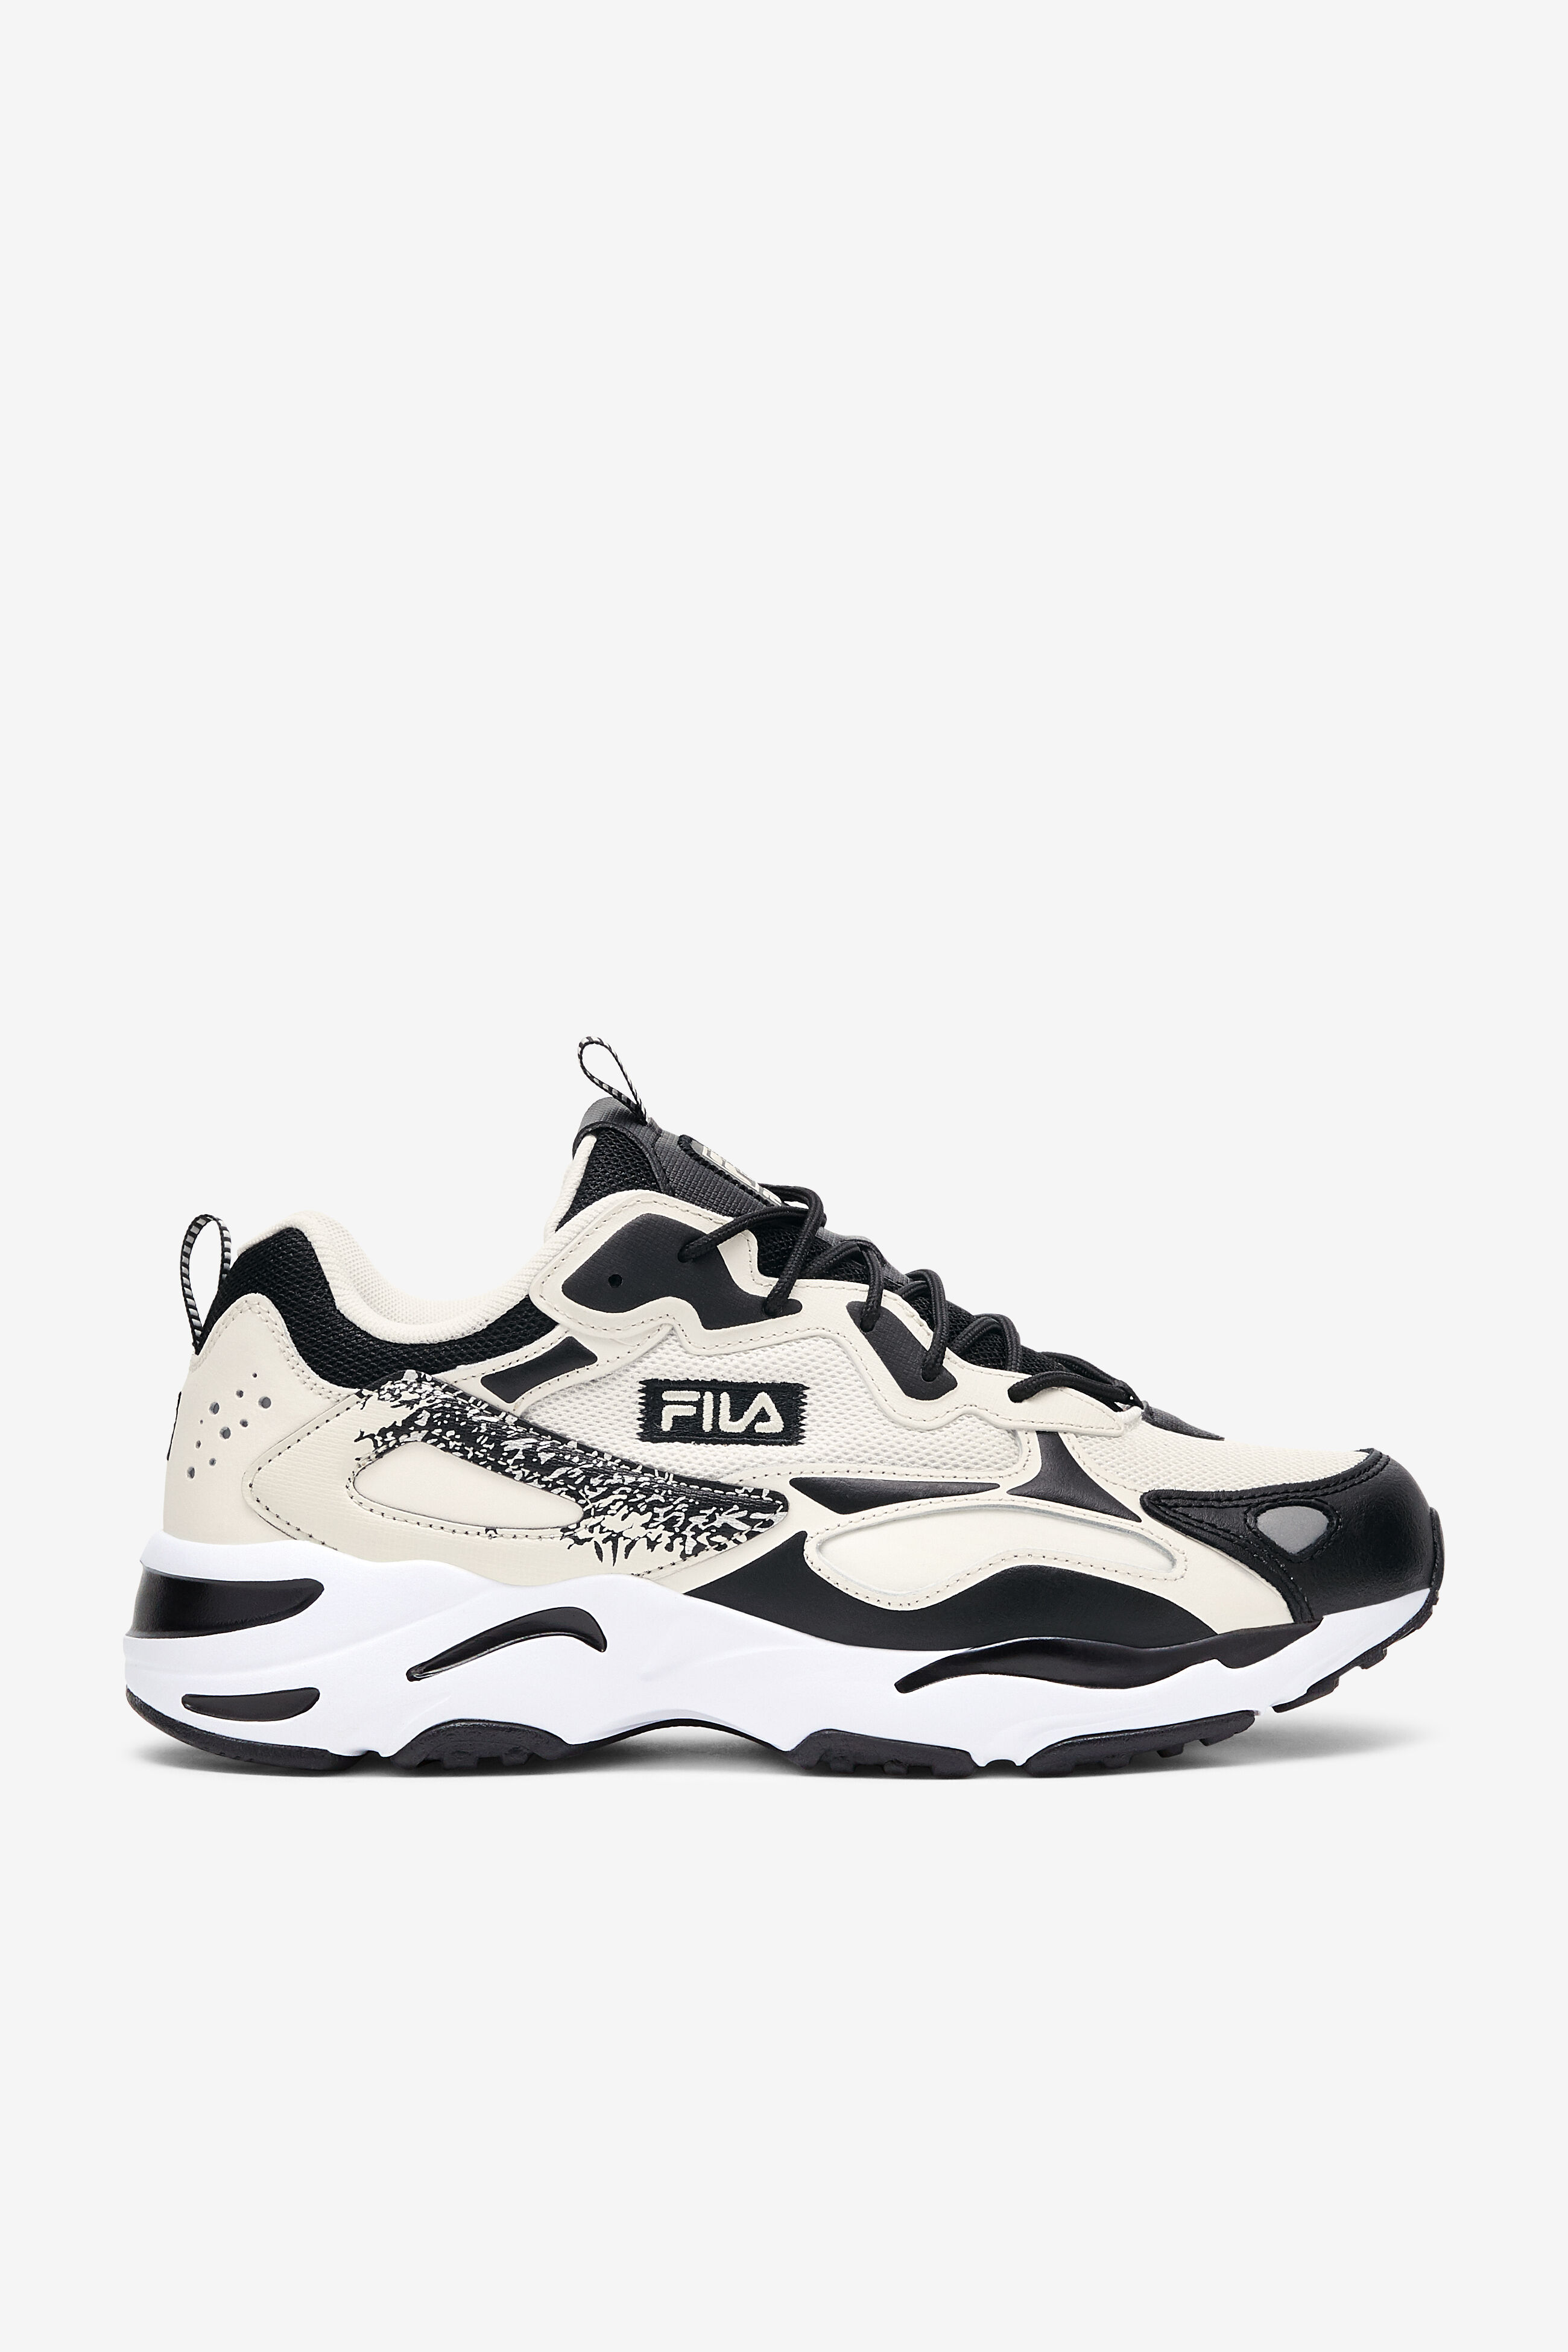 Fila Ray Tracer Evo In Black Multcolour | Mens Lace up Chunky Trainer –  4feetshoes